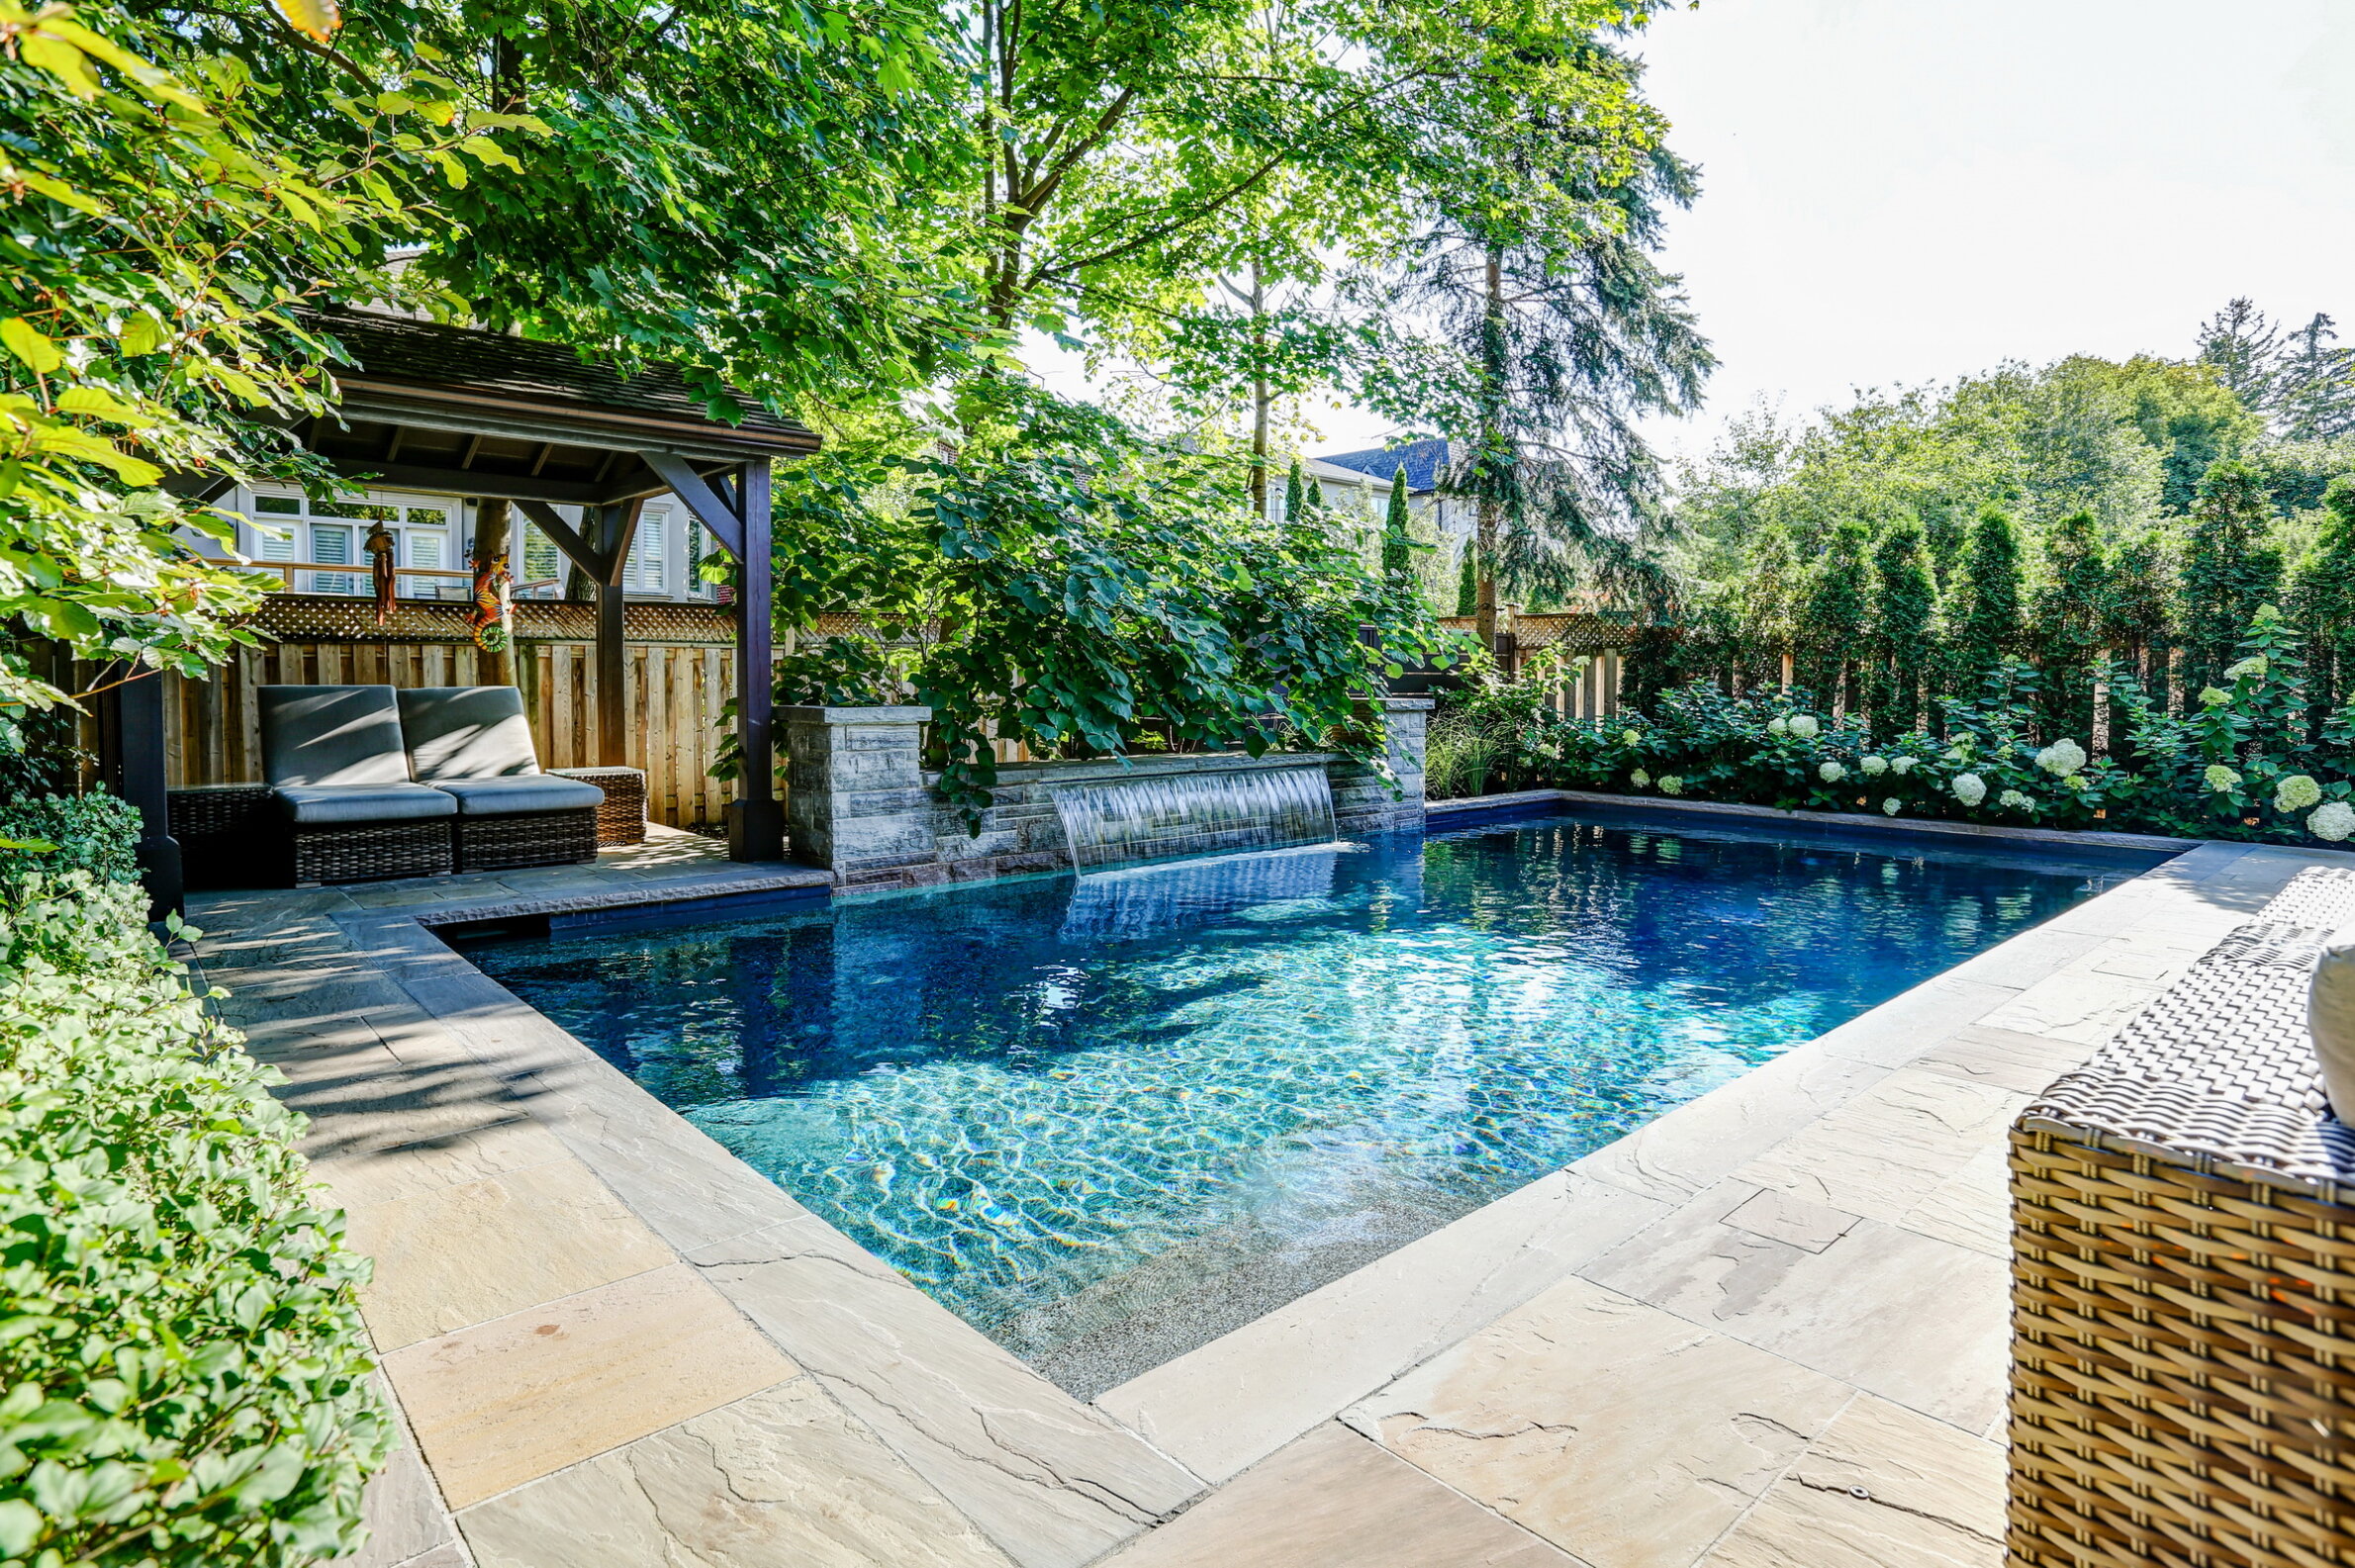 A luxurious backyard with a swimming pool, stone deck, cascading water feature, wooden gazebo with seating, surrounded by lush greenery and trees.